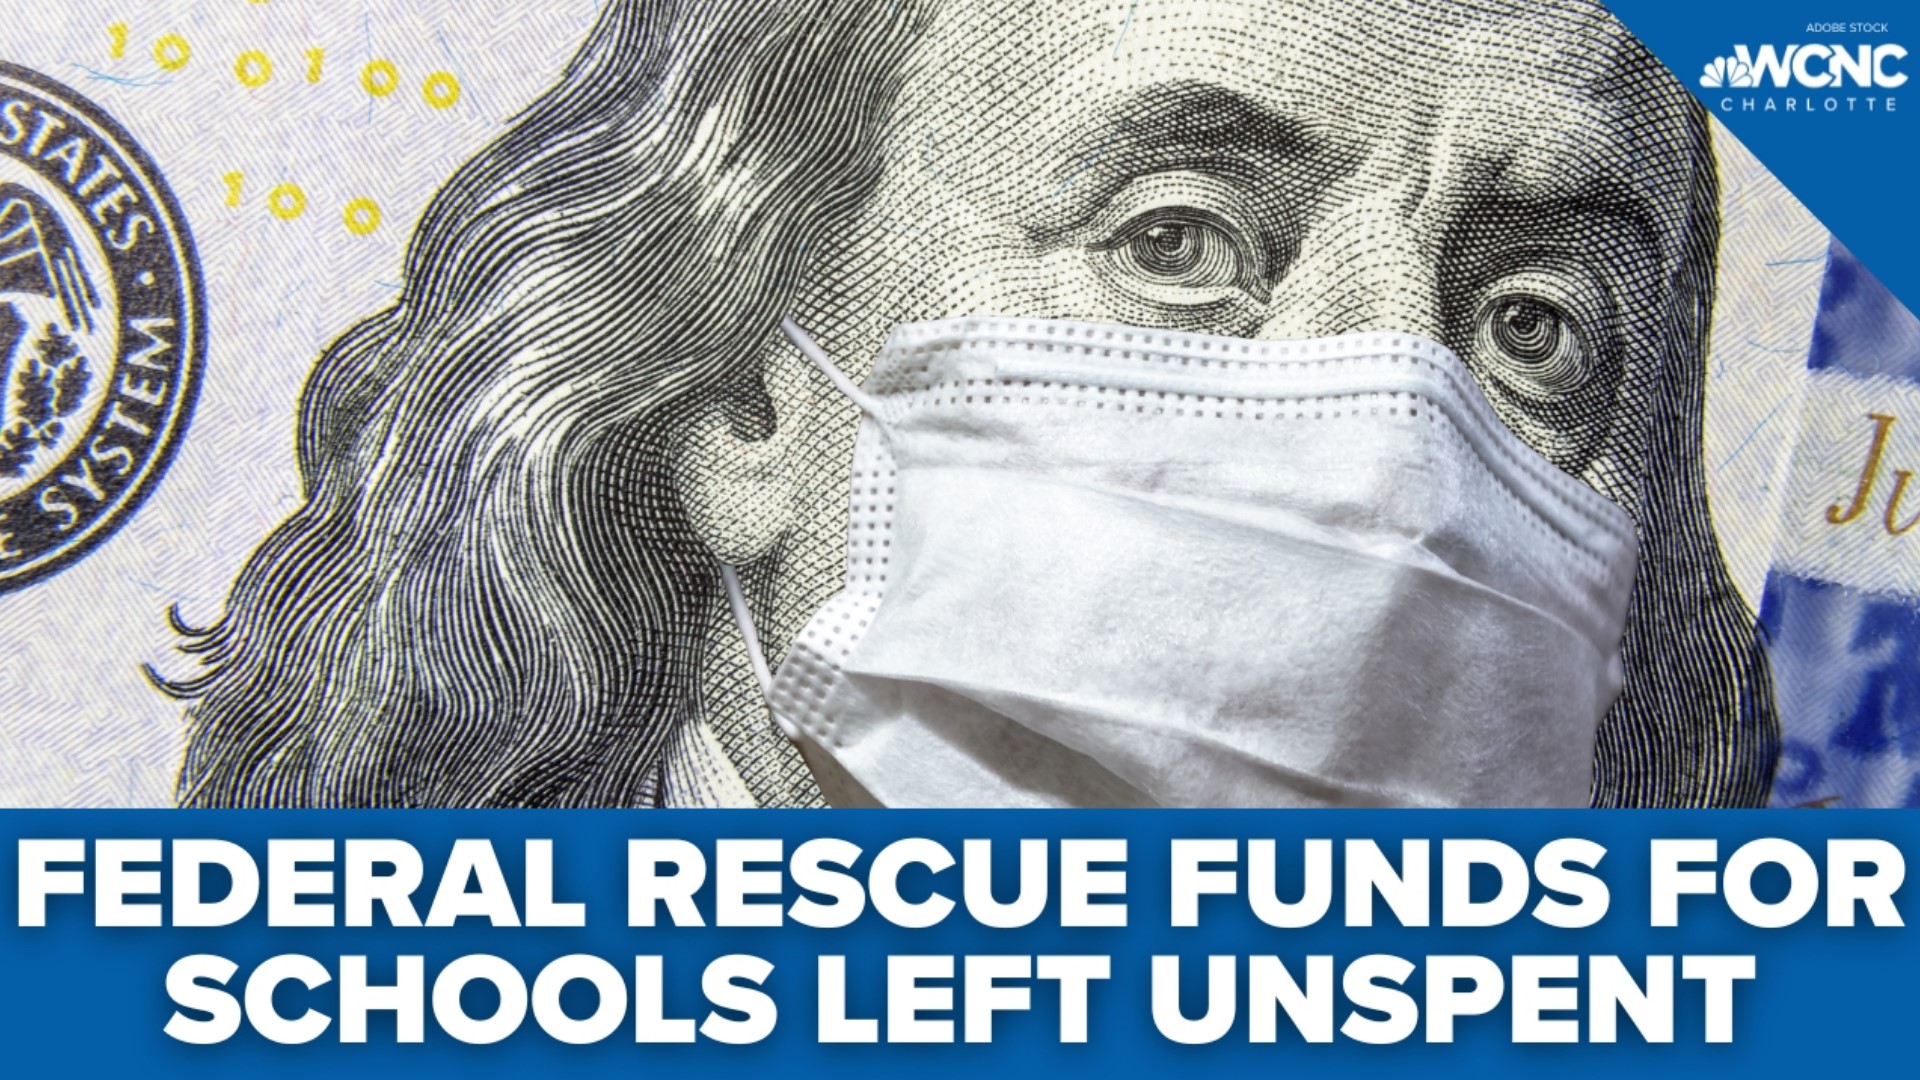 School districts are hoping their slow and steady approach to spending federal pandemic money that expires in two years will benefit students long-term.